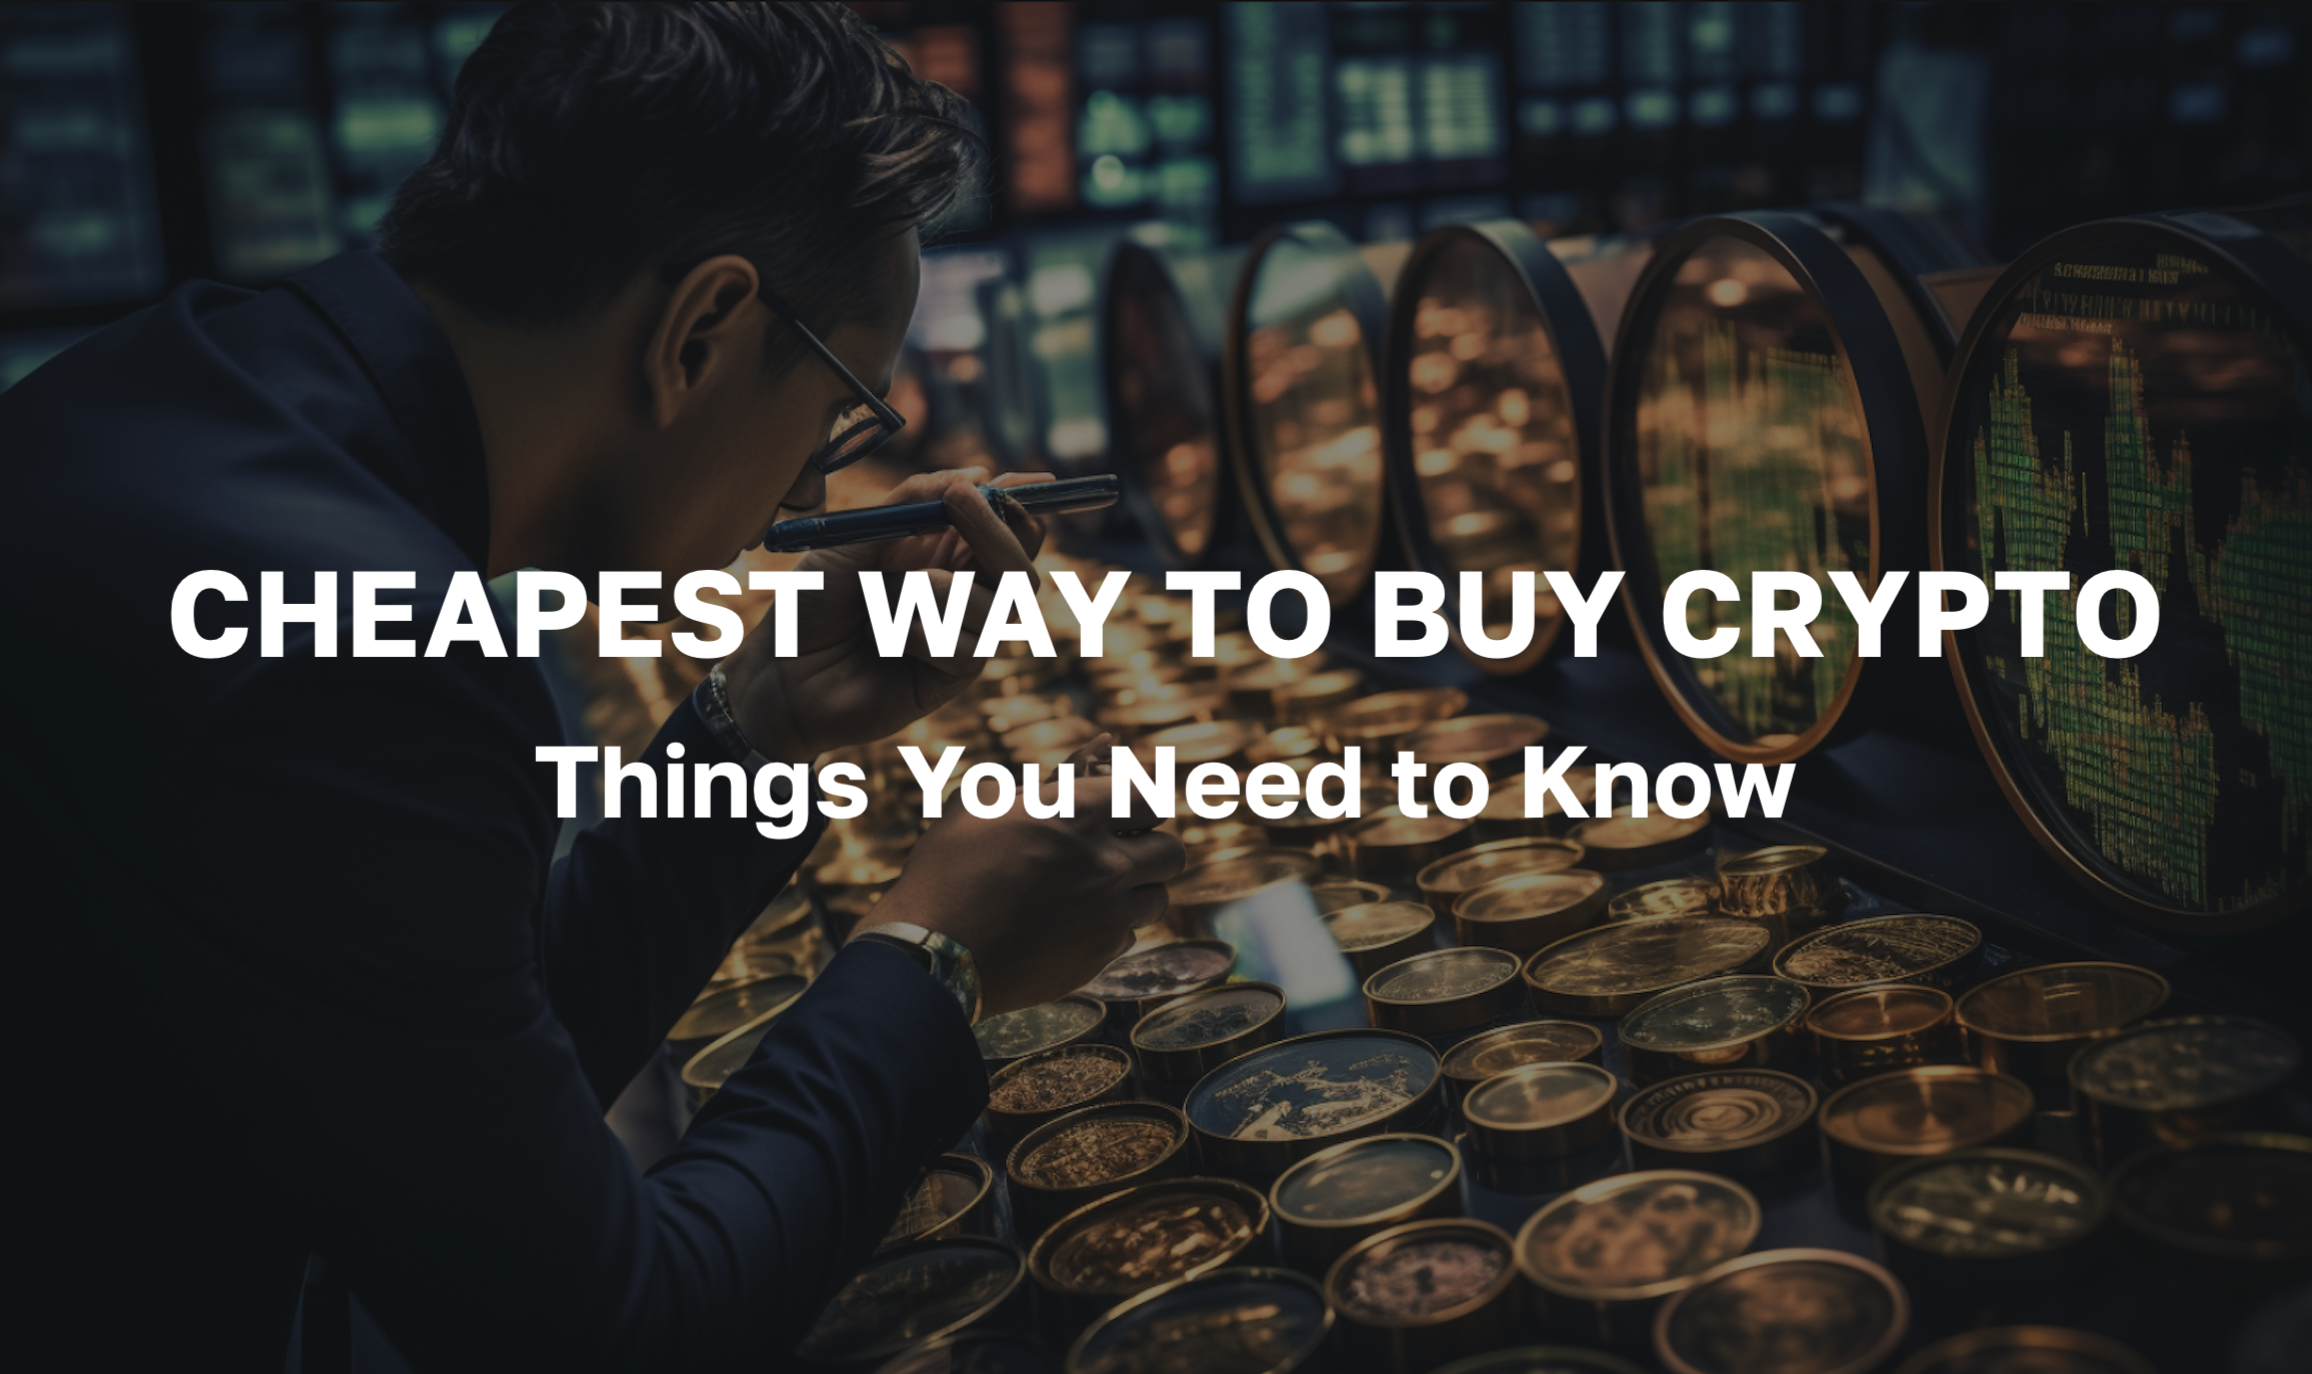 Discover the Best and Cheapest Way to Buy Crypto